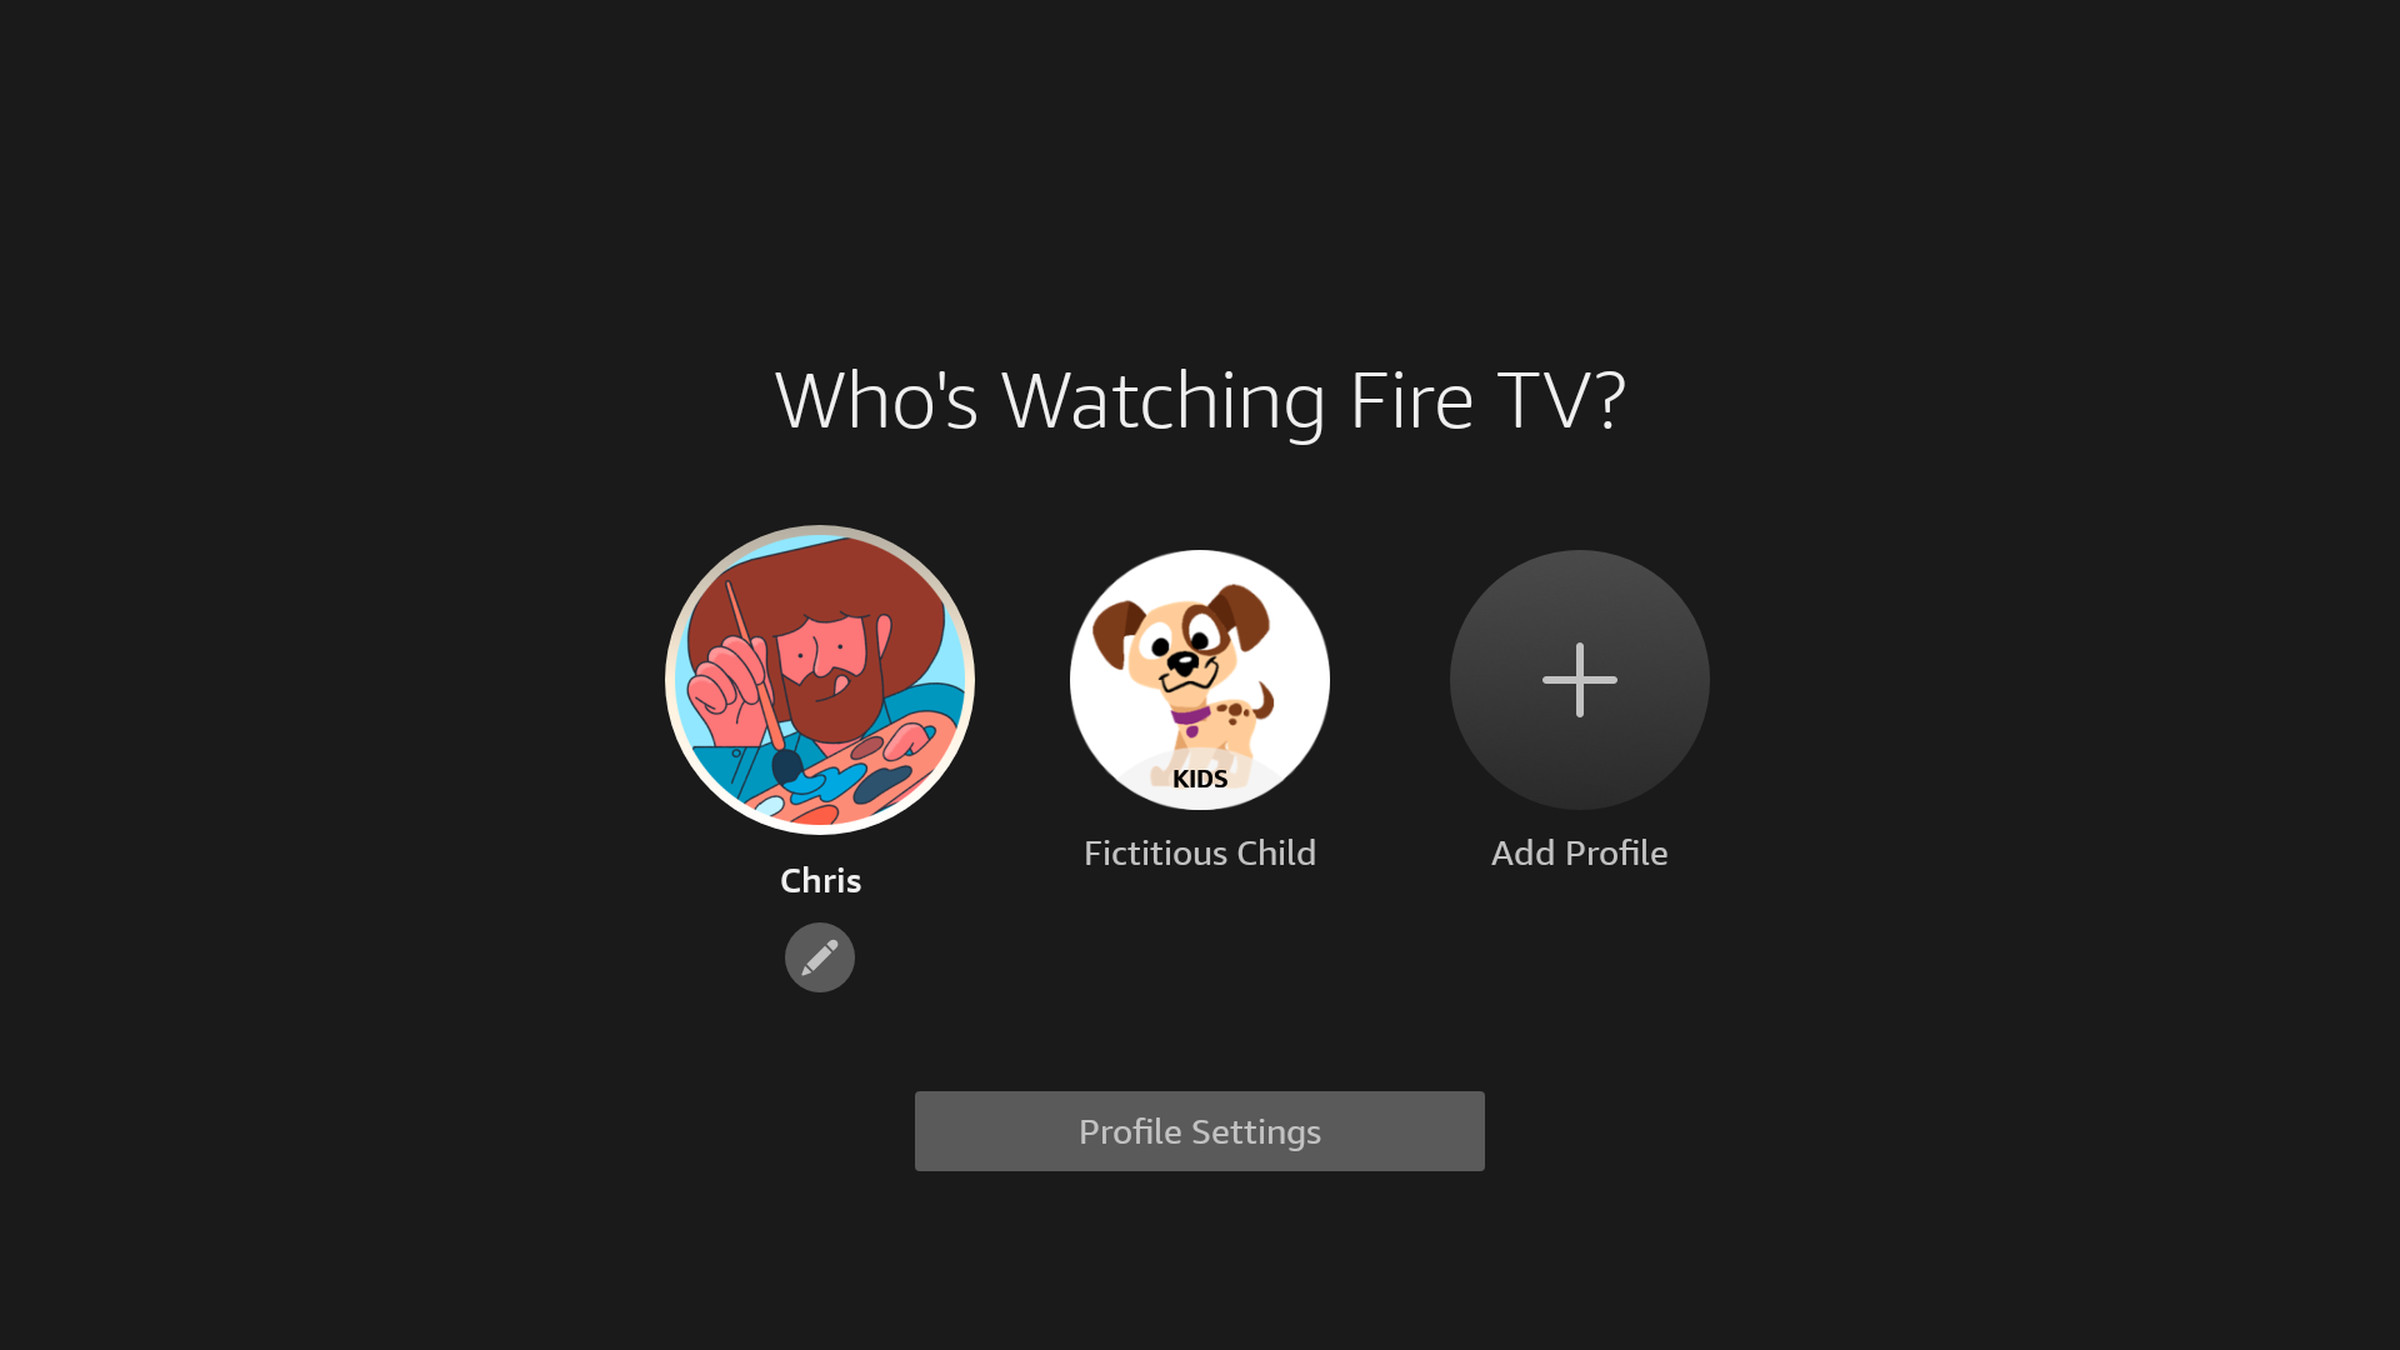 Up to six profiles can be made on each Fire TV.